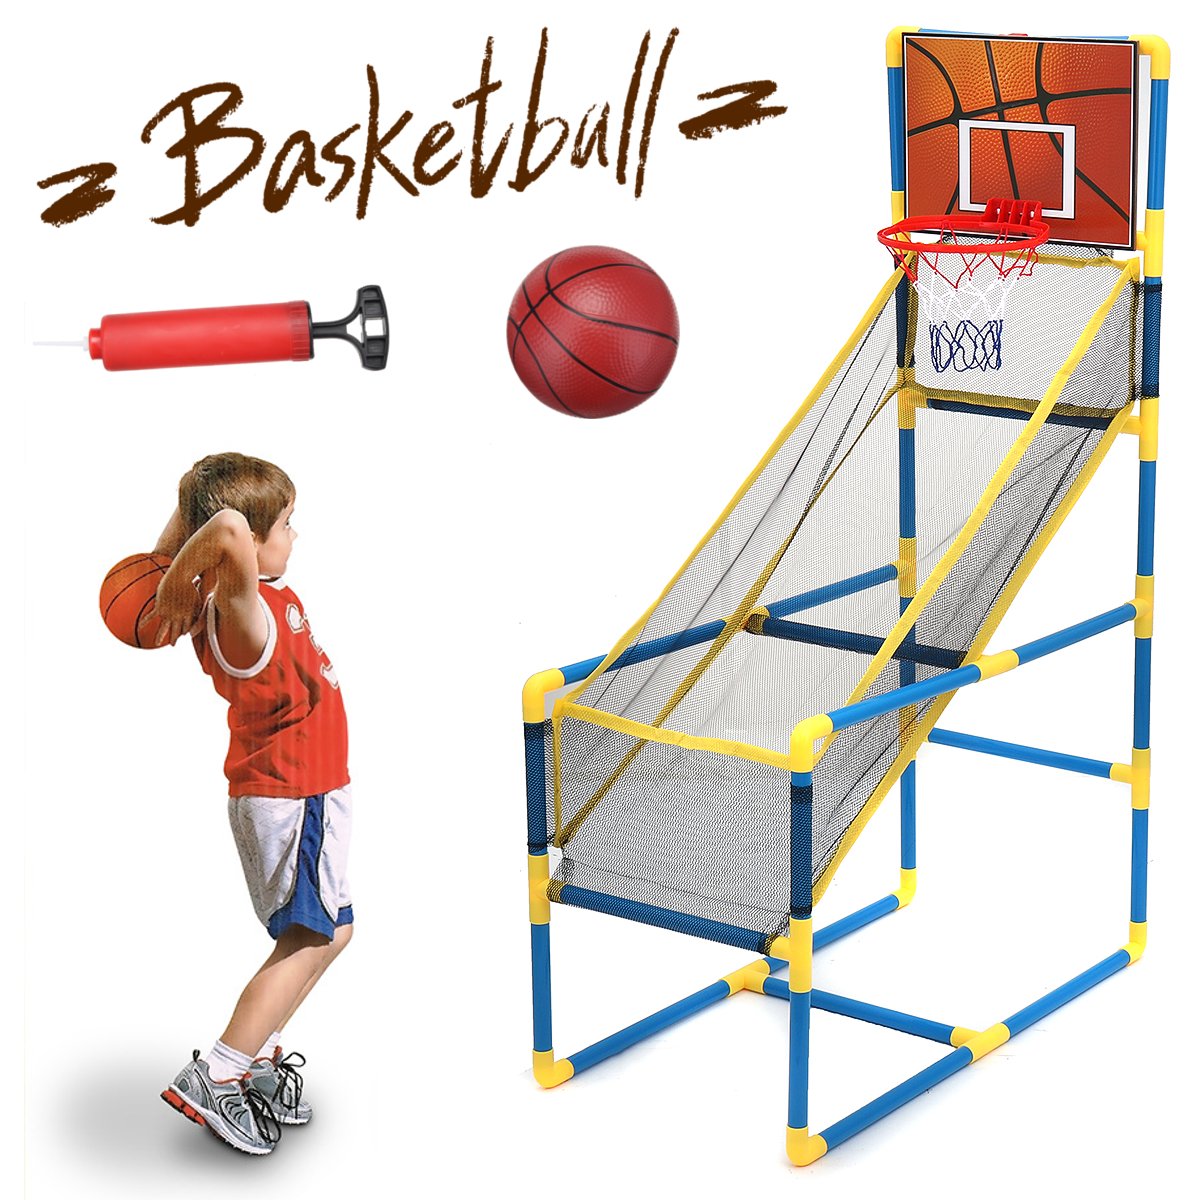 Children-Lightweight-Portable-Easy-Assemble-Basketball-Stand-Adjustable-Indoor-Outdoor-Sports-Toys-w-1829730-2